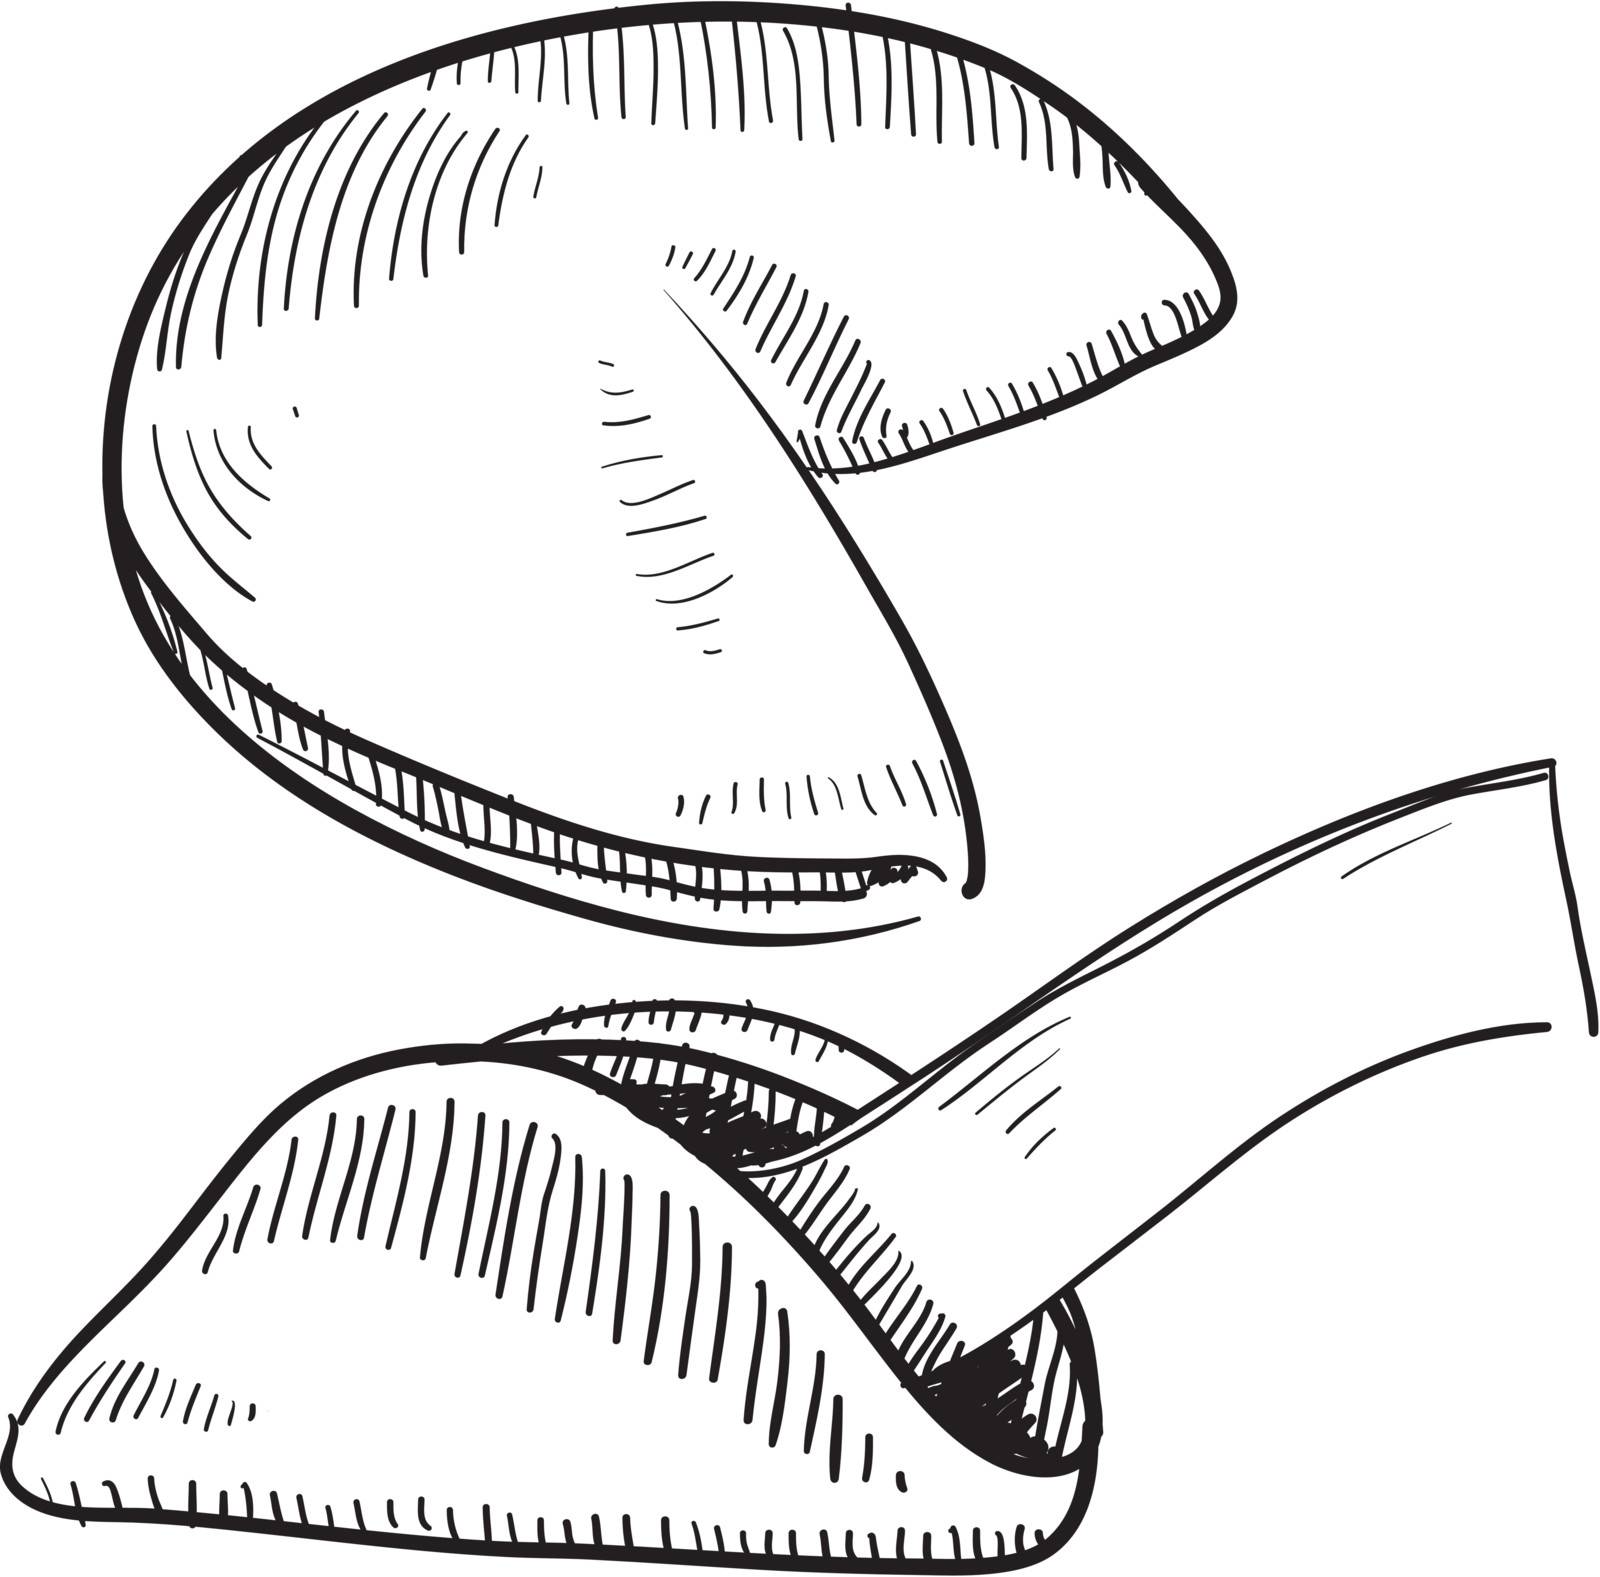 Fortune cookie sketch by lhfgraphics